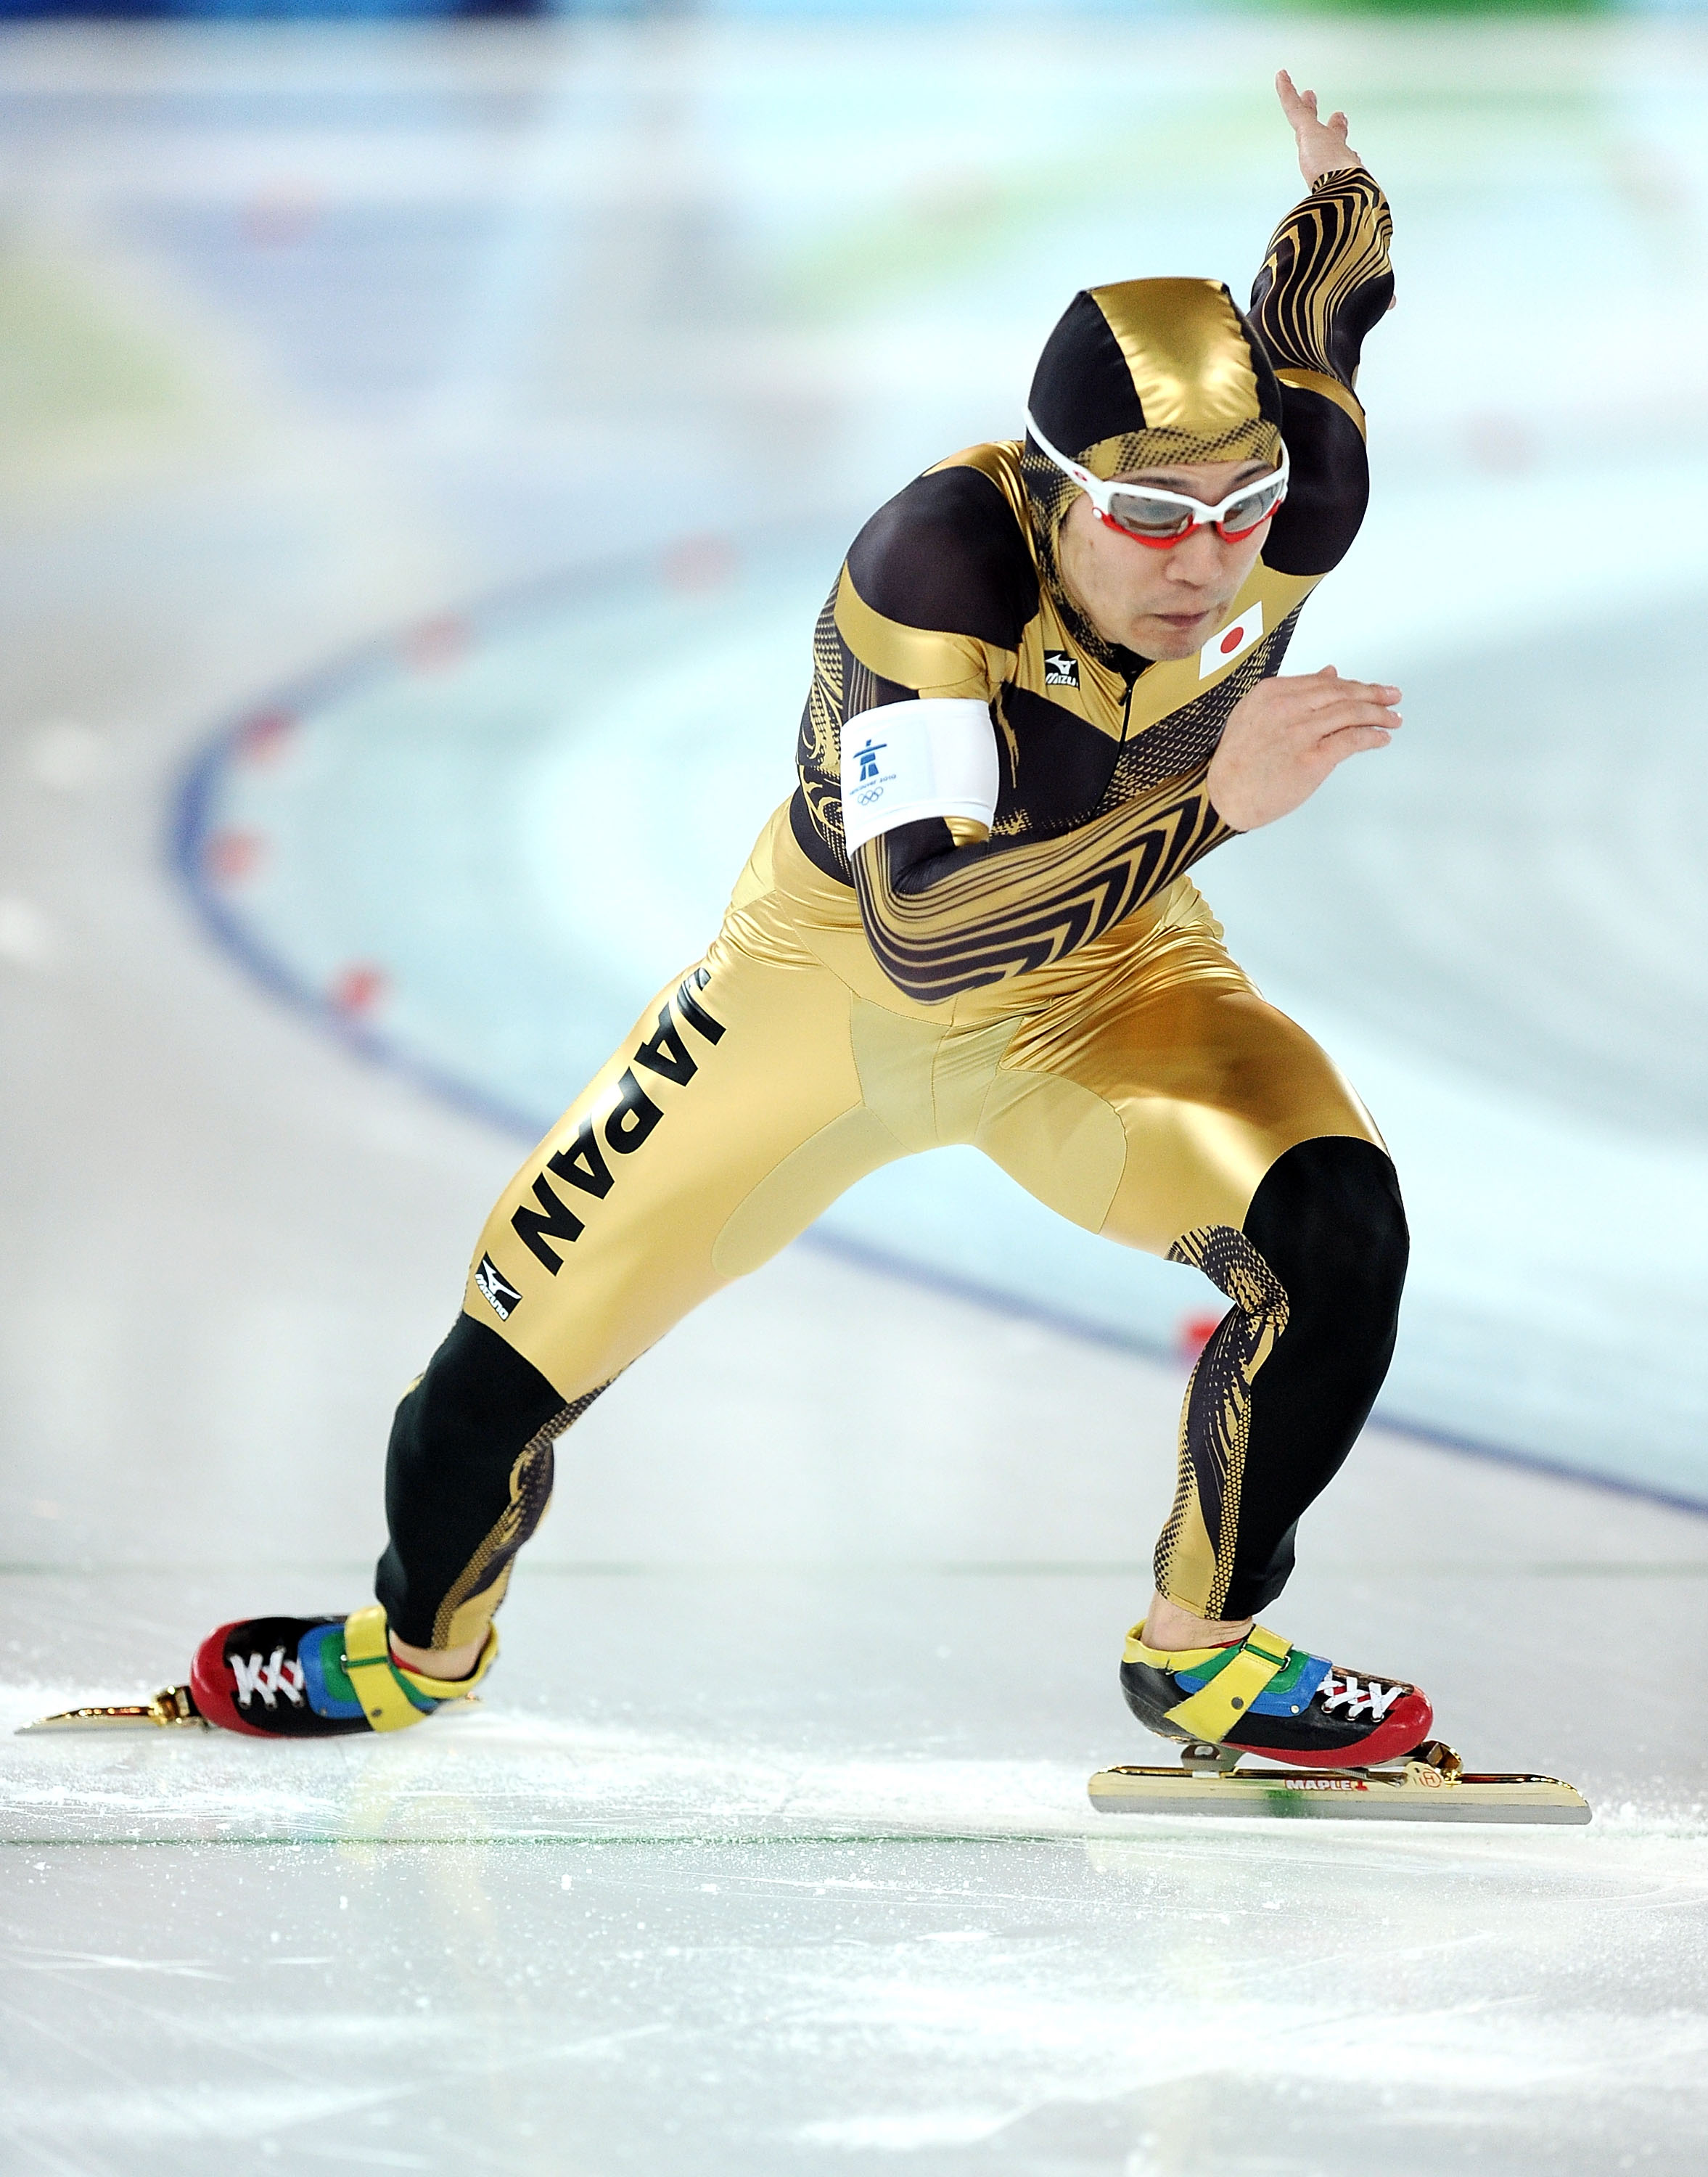 VANCOUVER, BC - FEBRUARY 15:  Joji Kato of Japan competes in the men's 500 m speed skating held at the Richmond Olympic Oval on day 4 of the Vancouver 2010 Winter Olympics at Richmond Olympic Oval on February 15, 2010 in Vancouver, Canada.  (Photo by Jasp